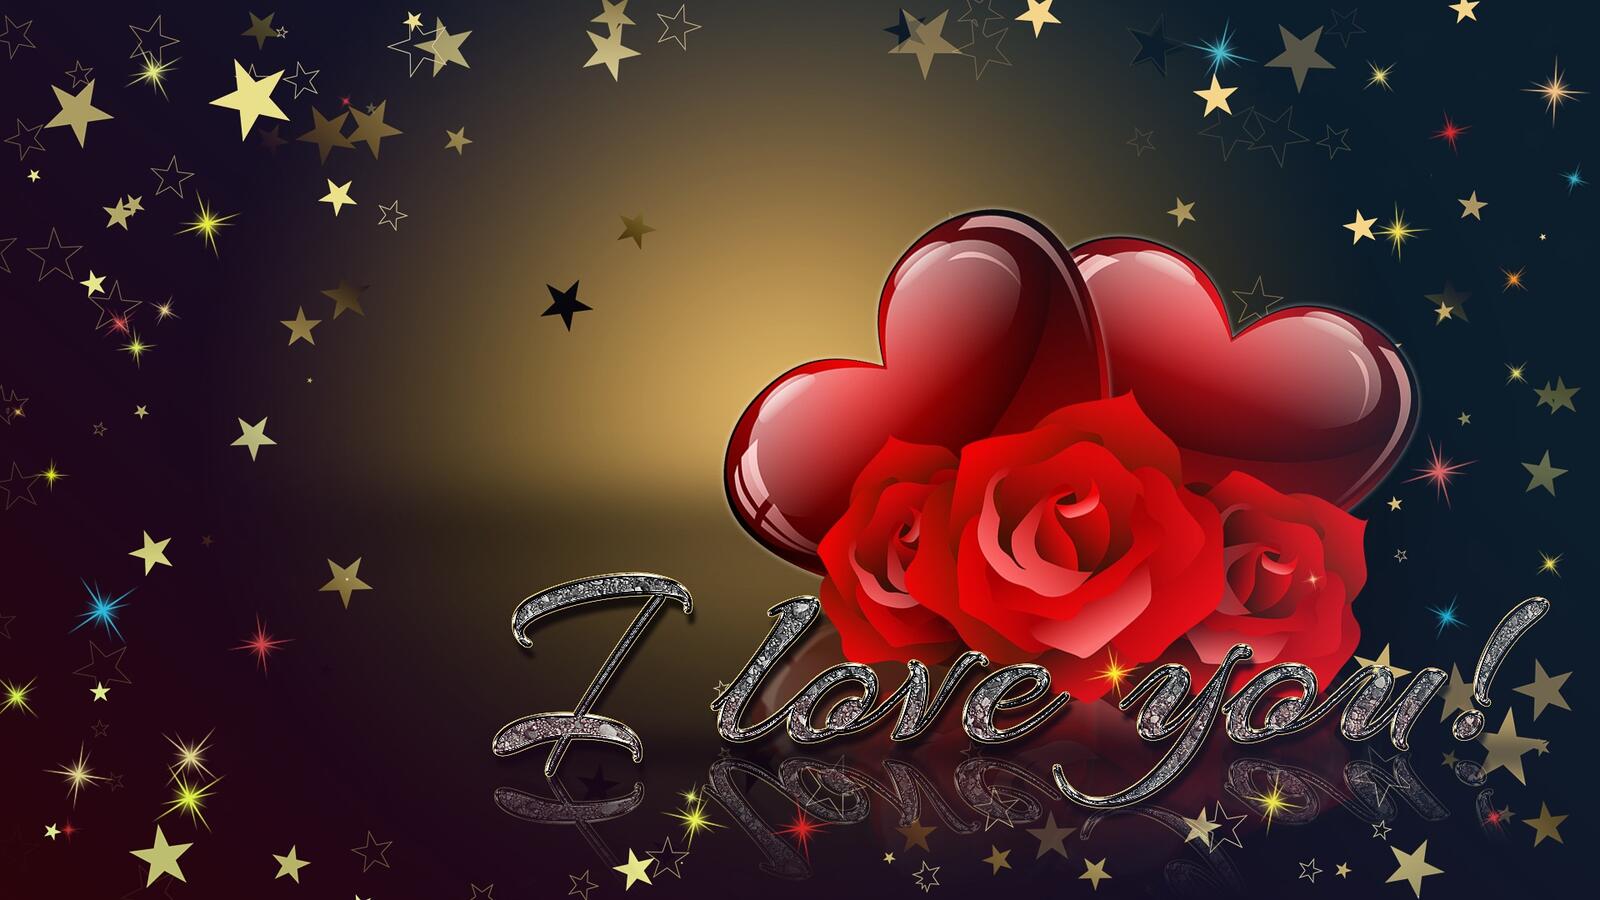 Wallpapers Roses Valentines Heart on the desktop